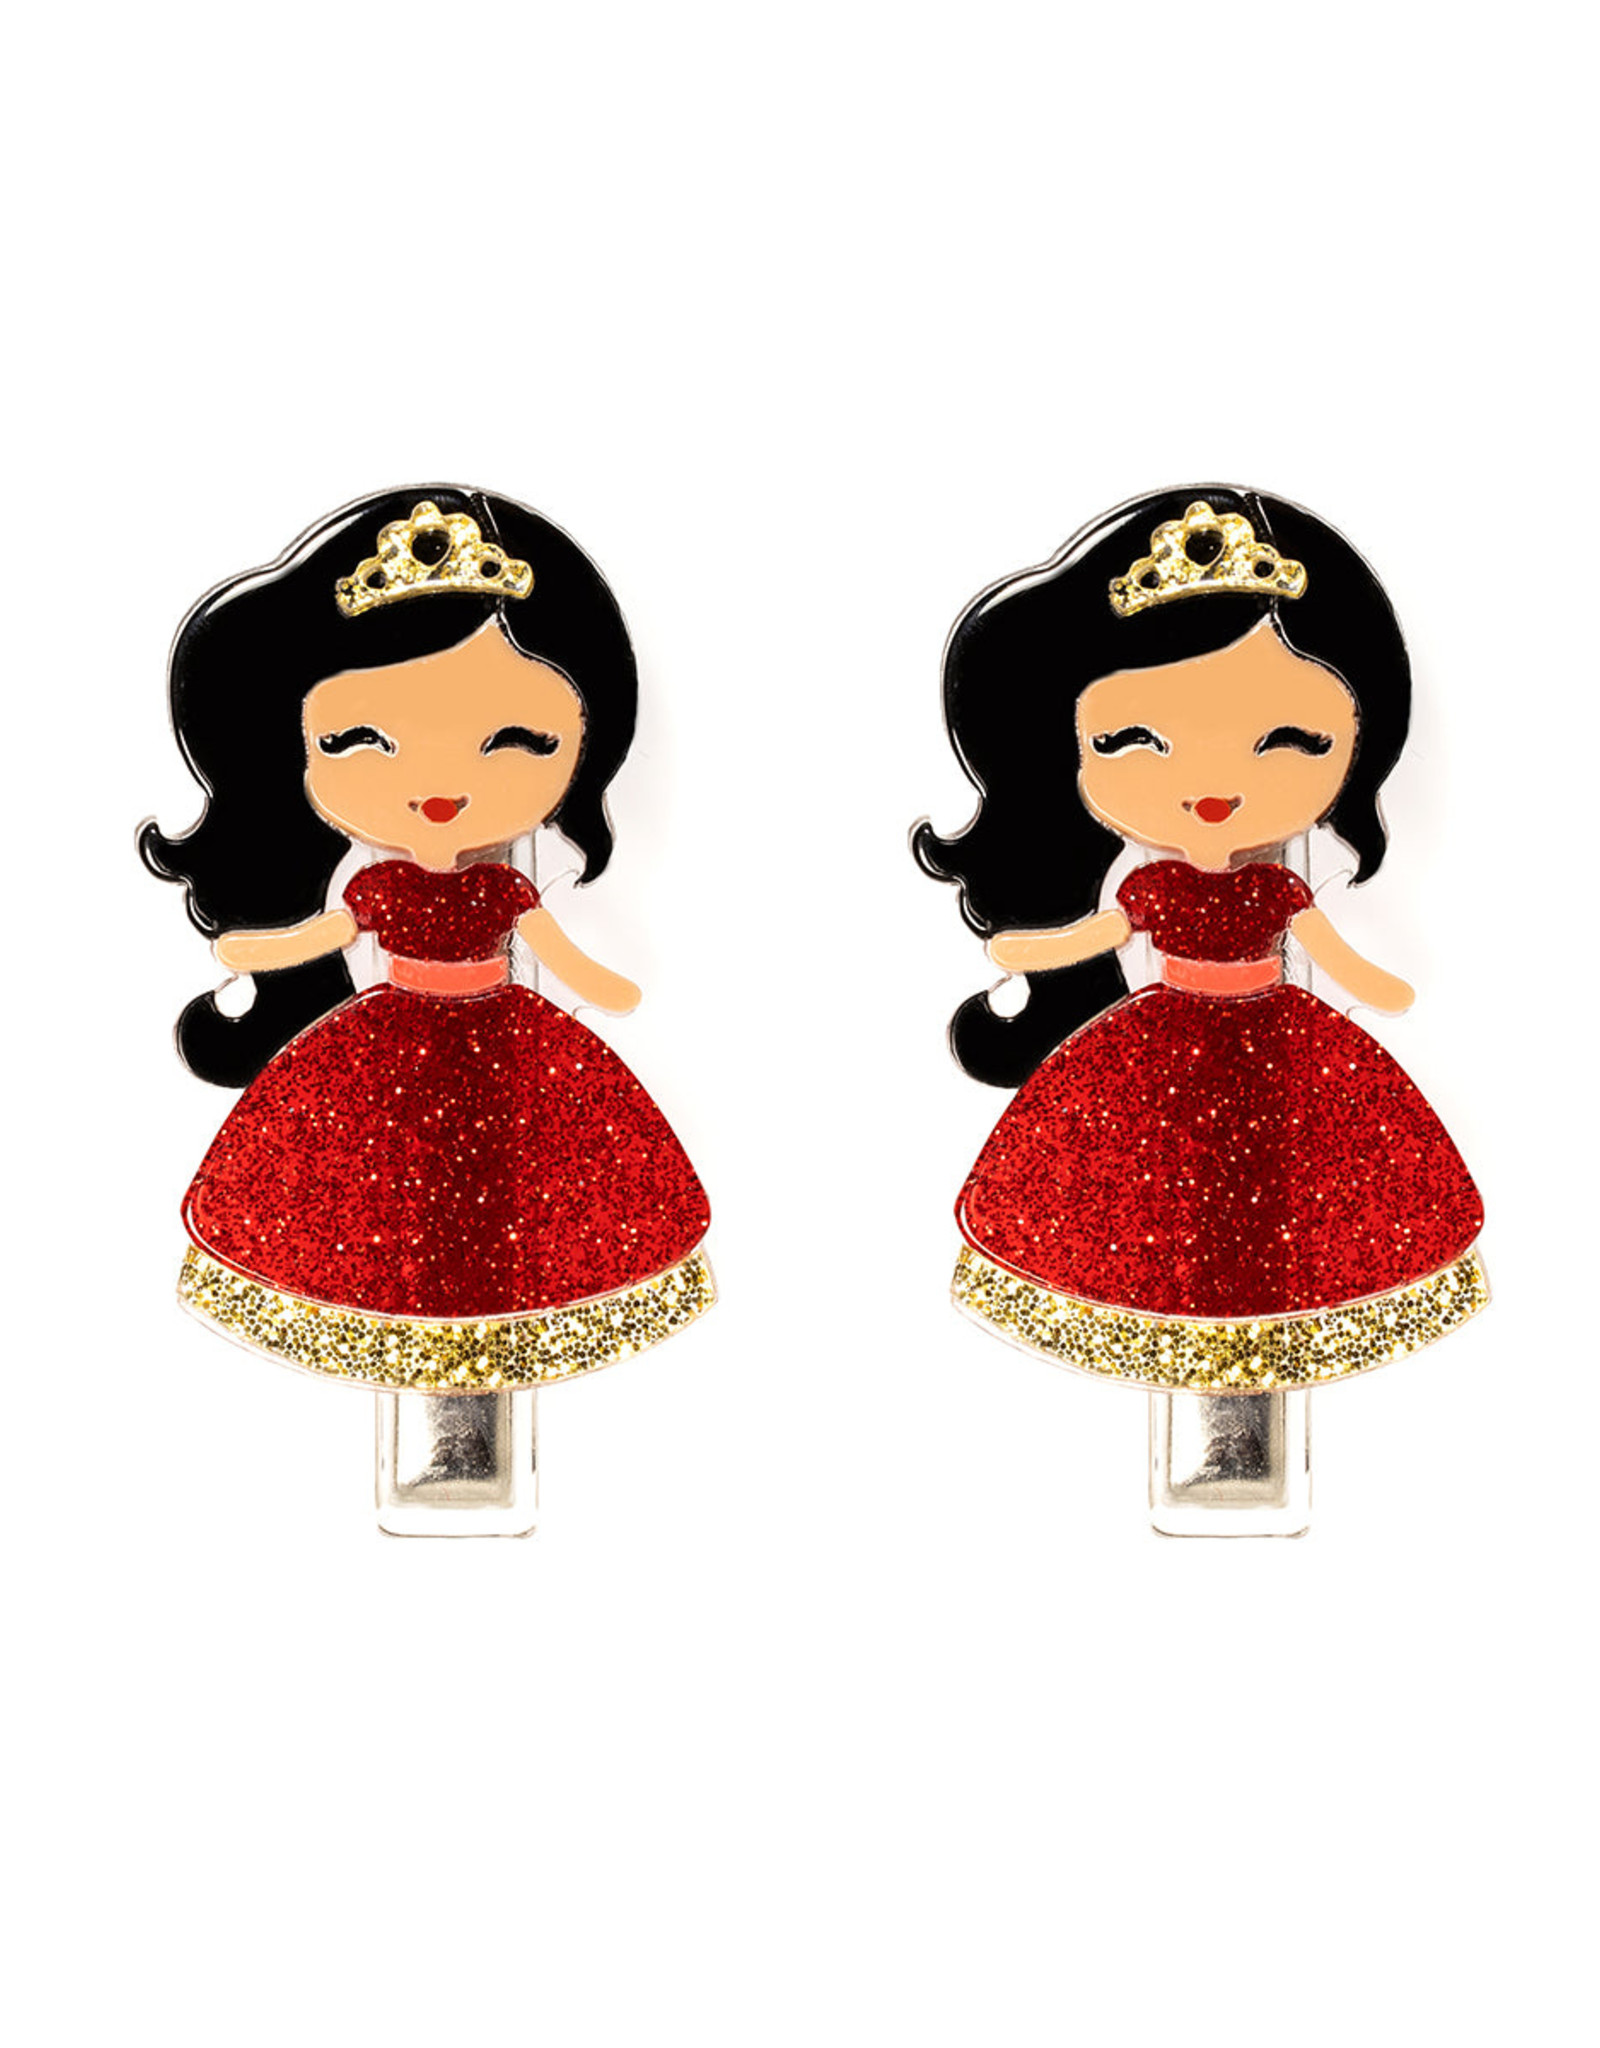 Lilies & Roses LR Alligator Clips Cute Doll Red Dress AC078-7